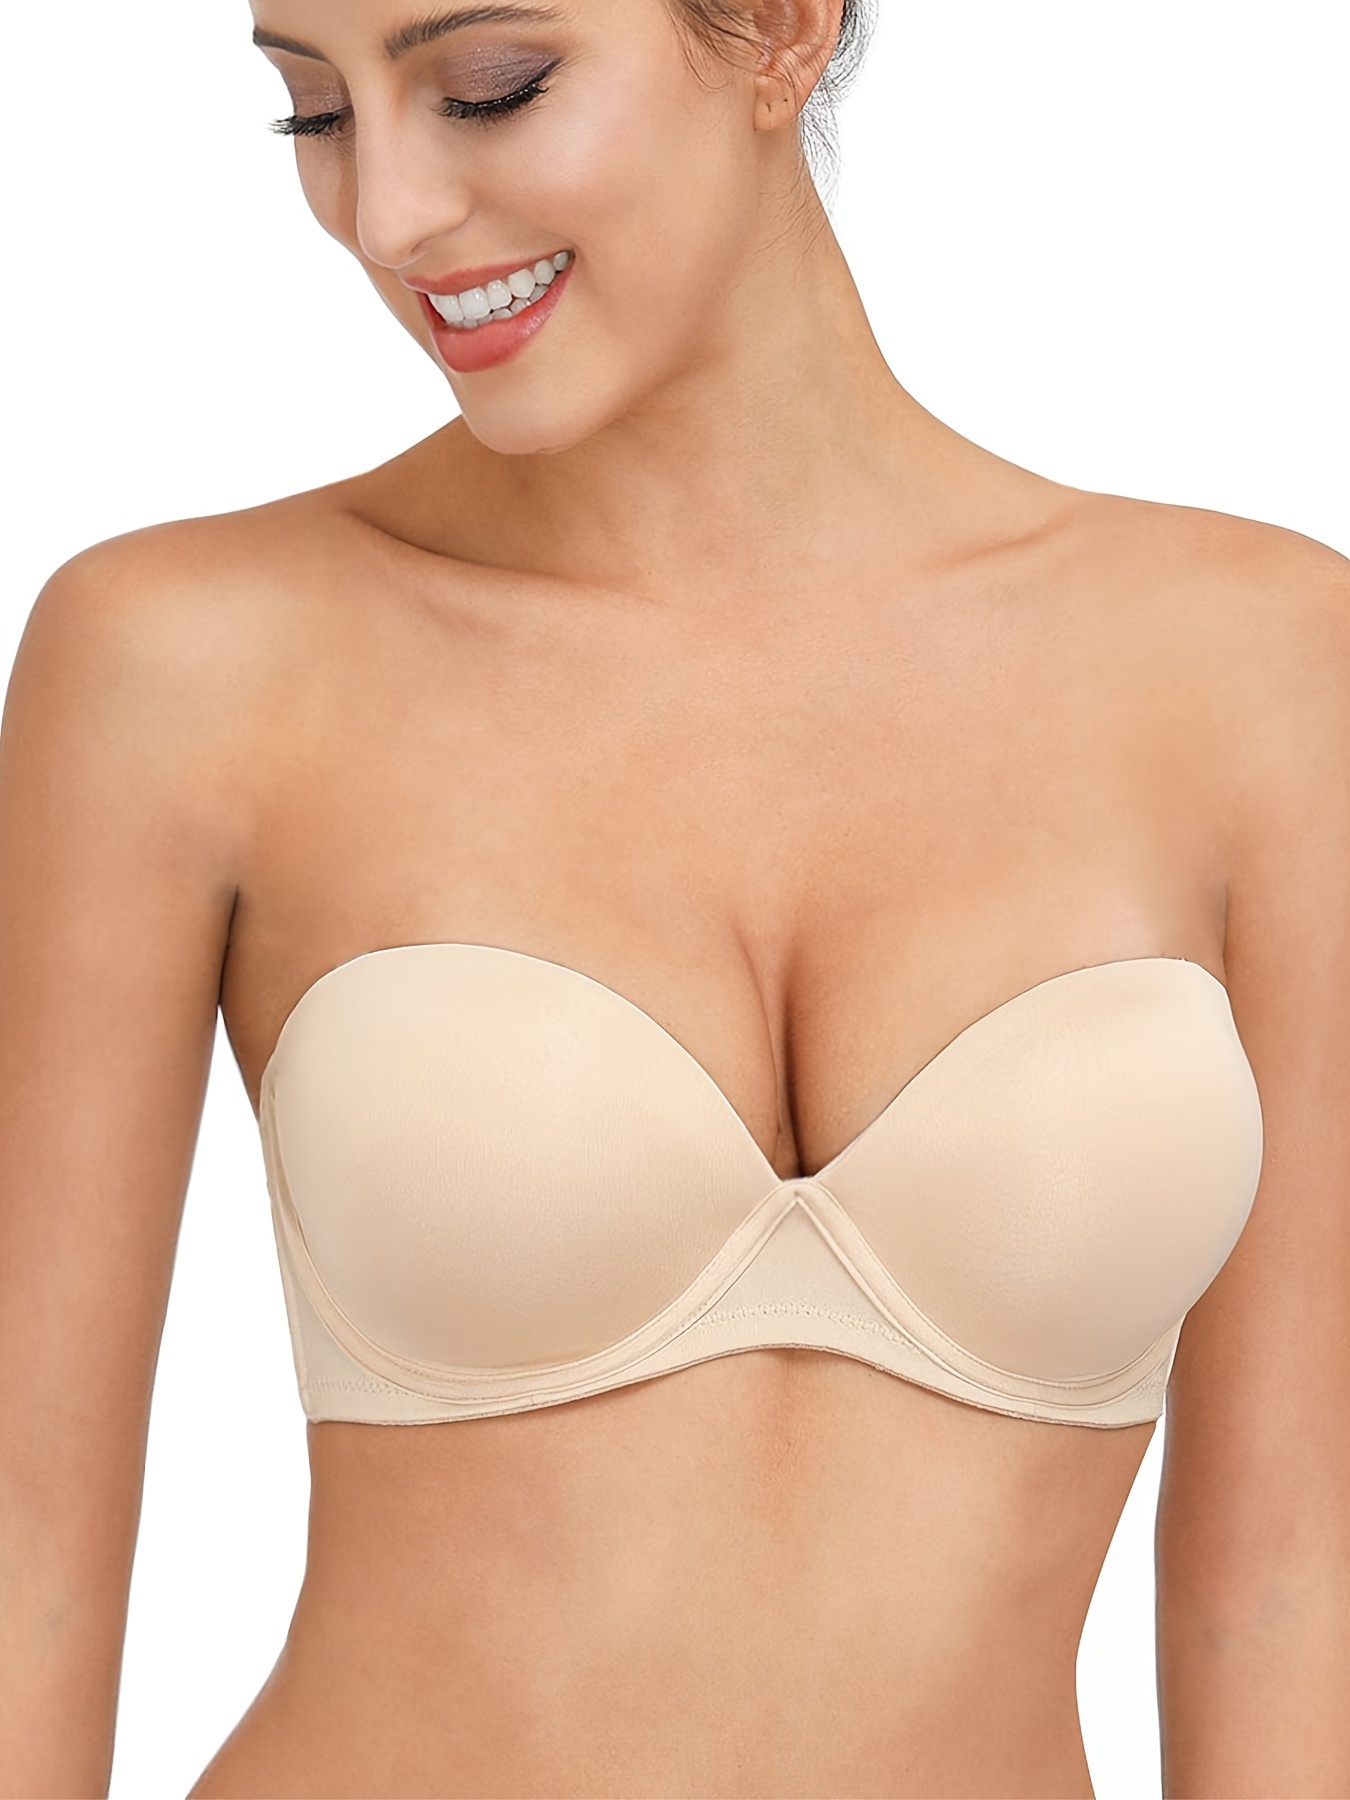 Women's Strapless Bra For Large Bust Back Smoothing With Underwire